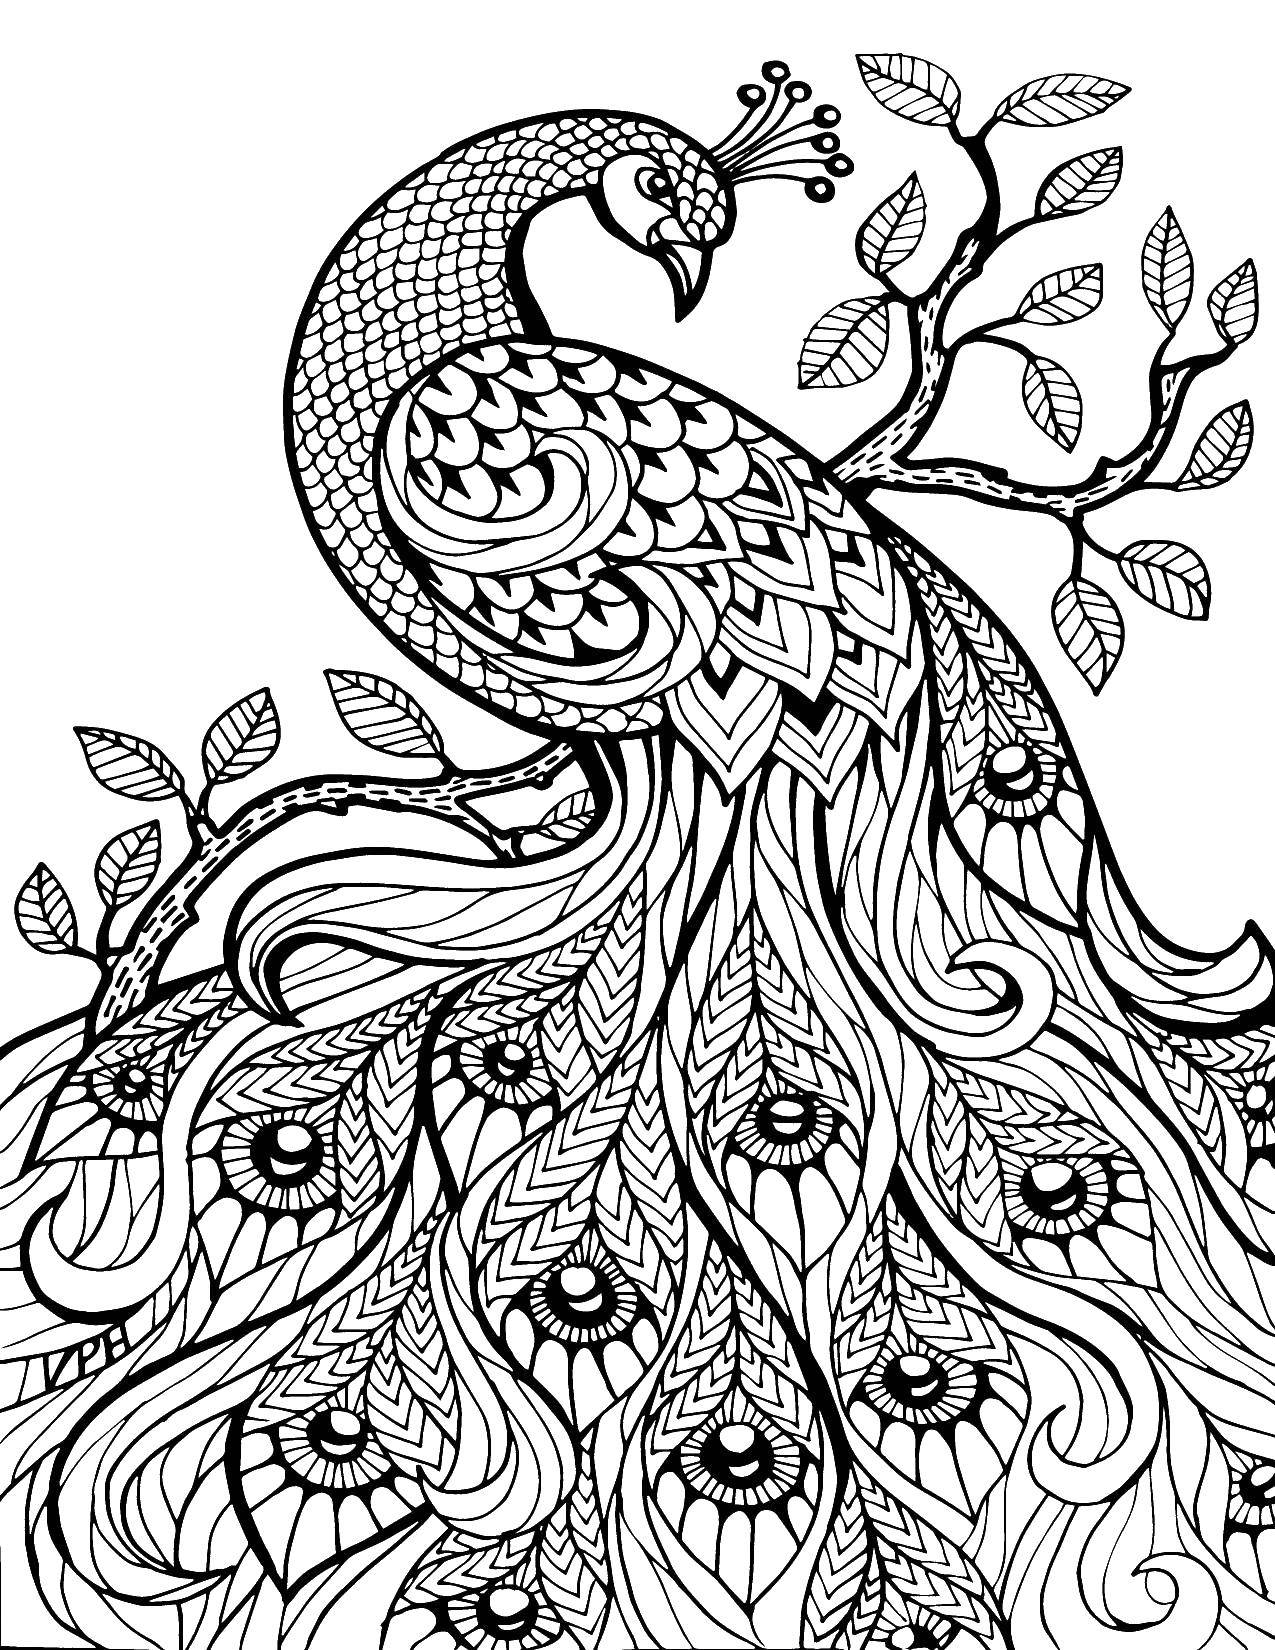 Coloring Patterned peacock. Category birds. Tags:  Birds, peacock.